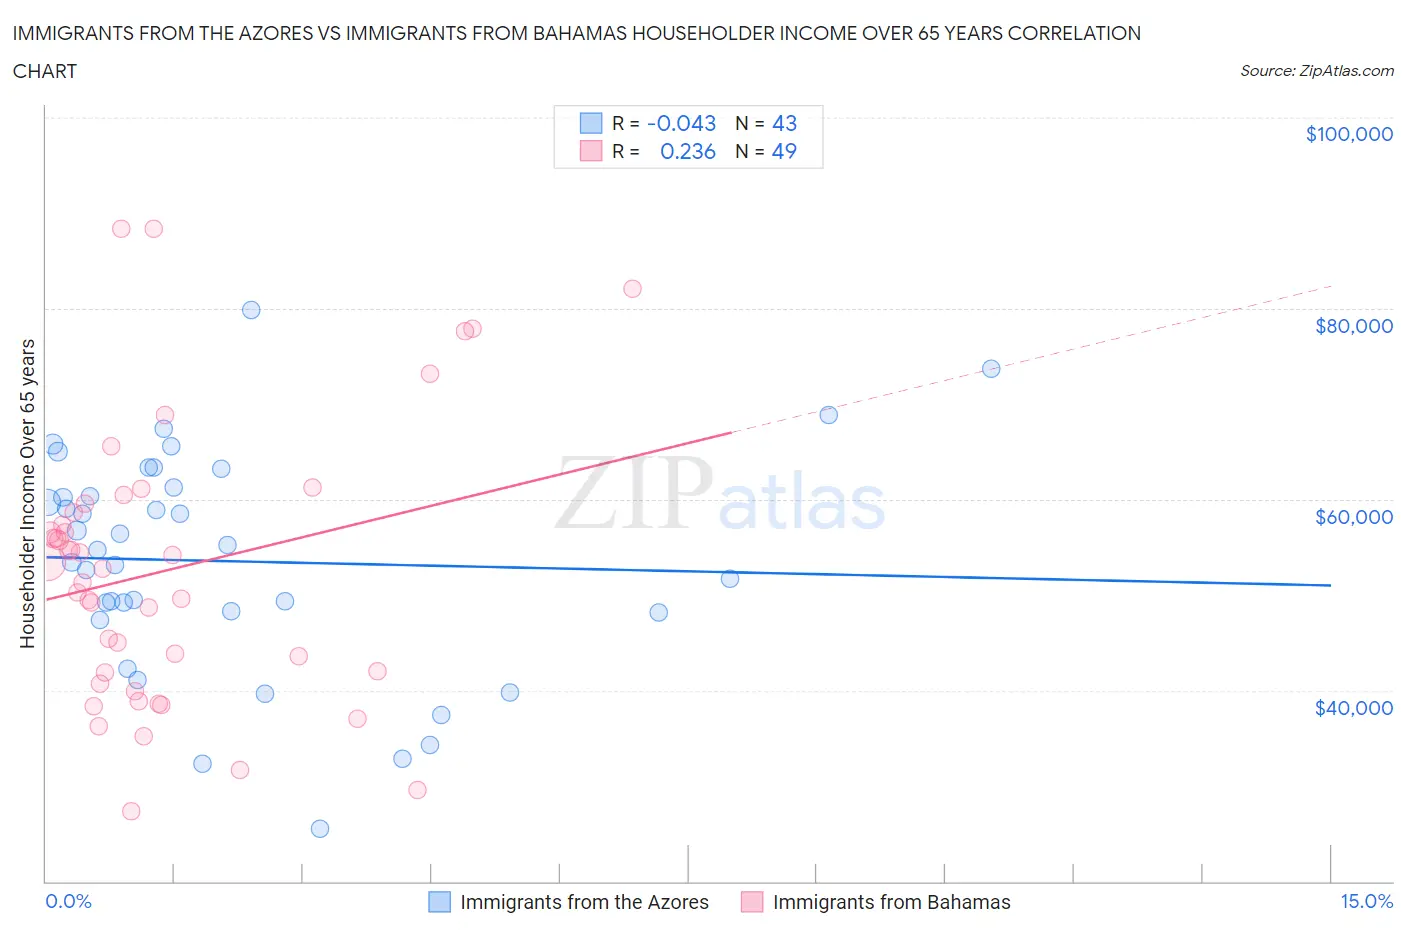 Immigrants from the Azores vs Immigrants from Bahamas Householder Income Over 65 years